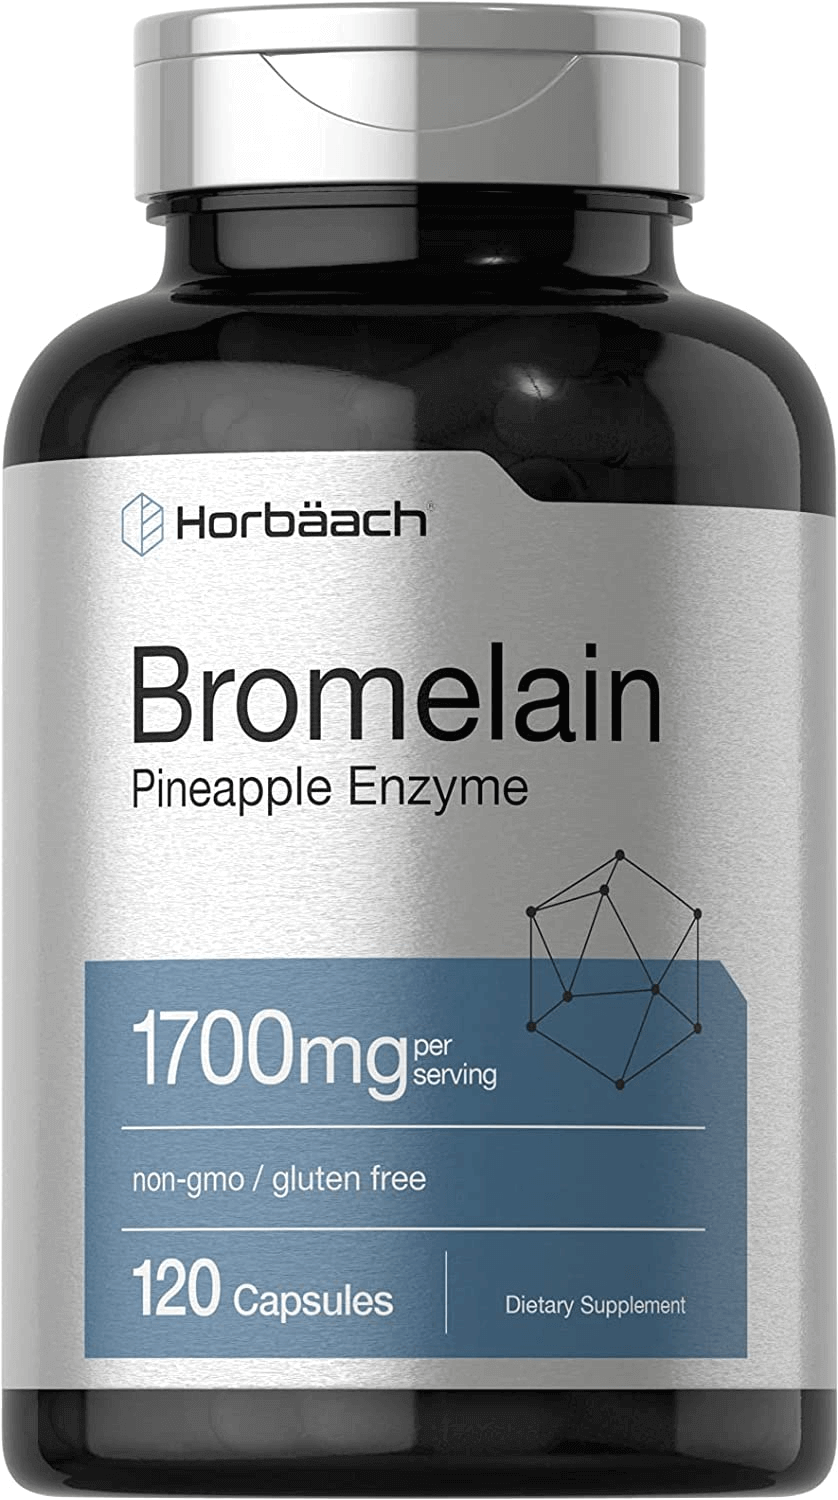 Bromelain 1700 Mg | 120 Capsules | Supports Digestive Health | Pineapple Enzyme Supplement | Non-Gmo, Gluten Free | by Horbaach - vitamenstore.com